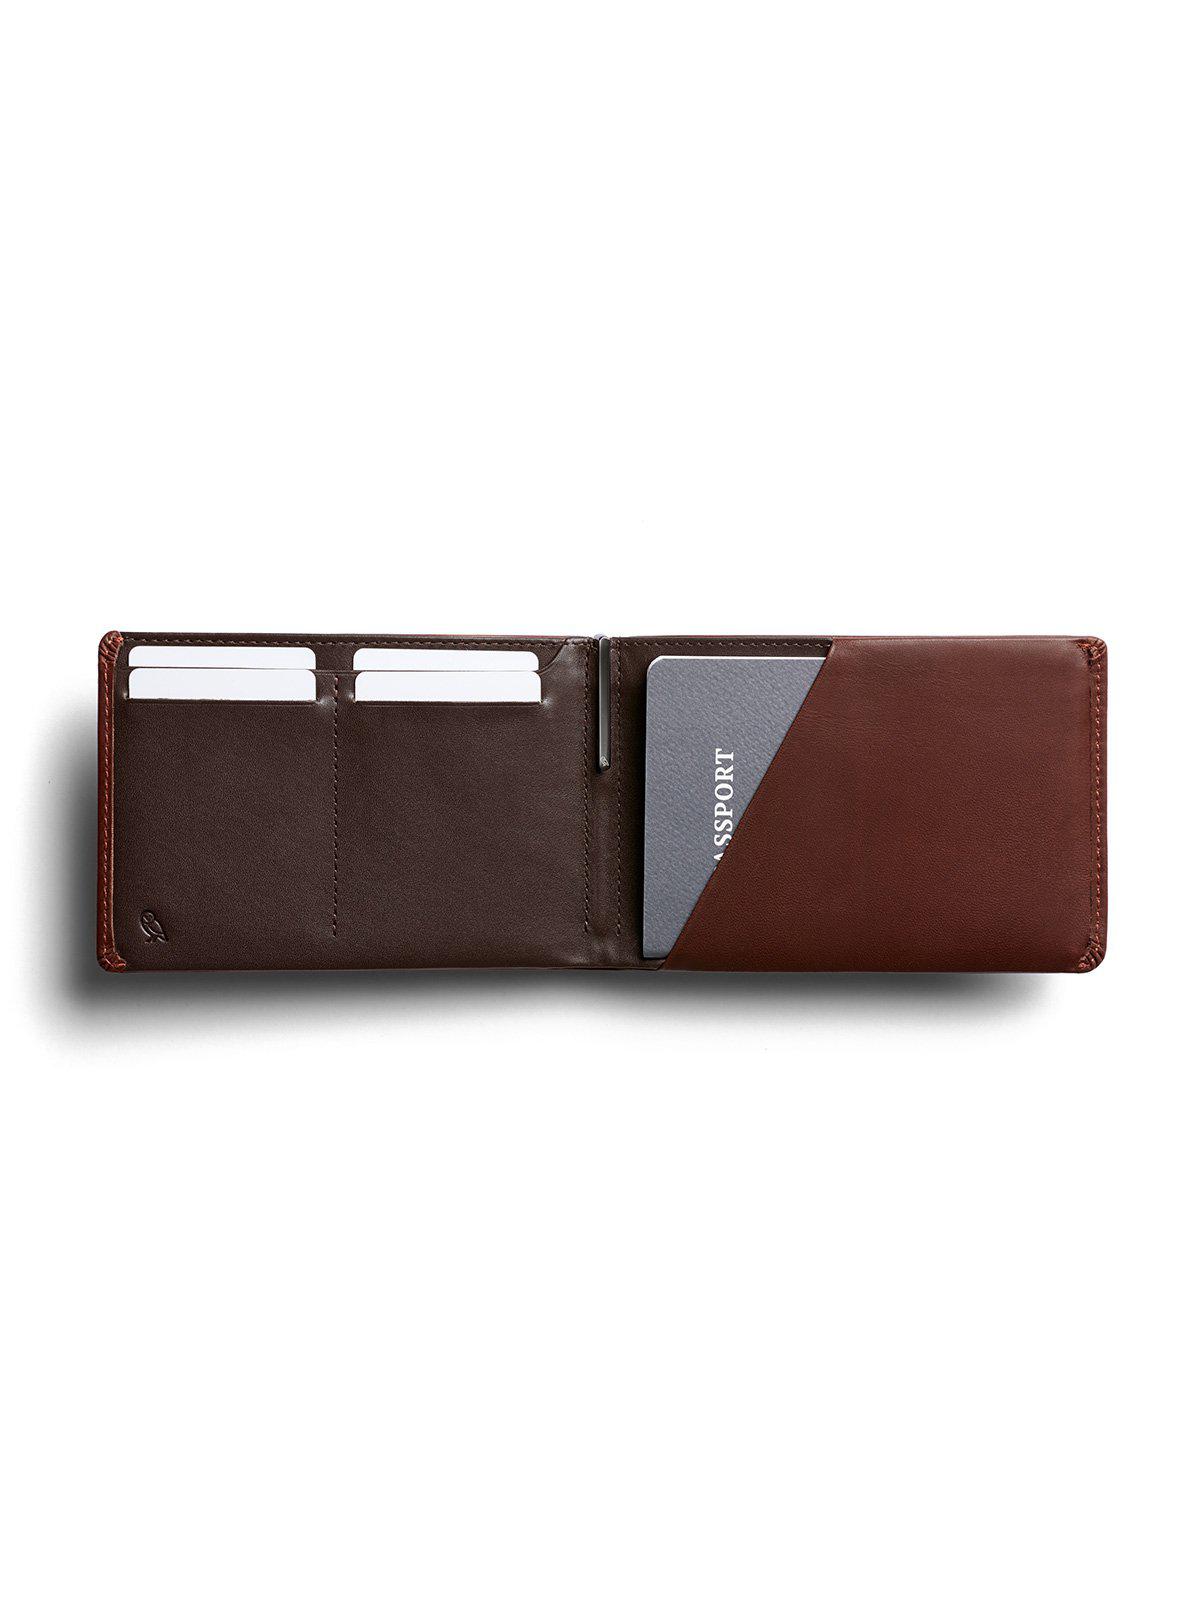 Bellroy Travel Wallet Cocoa RFID - MORE by Morello Indonesia